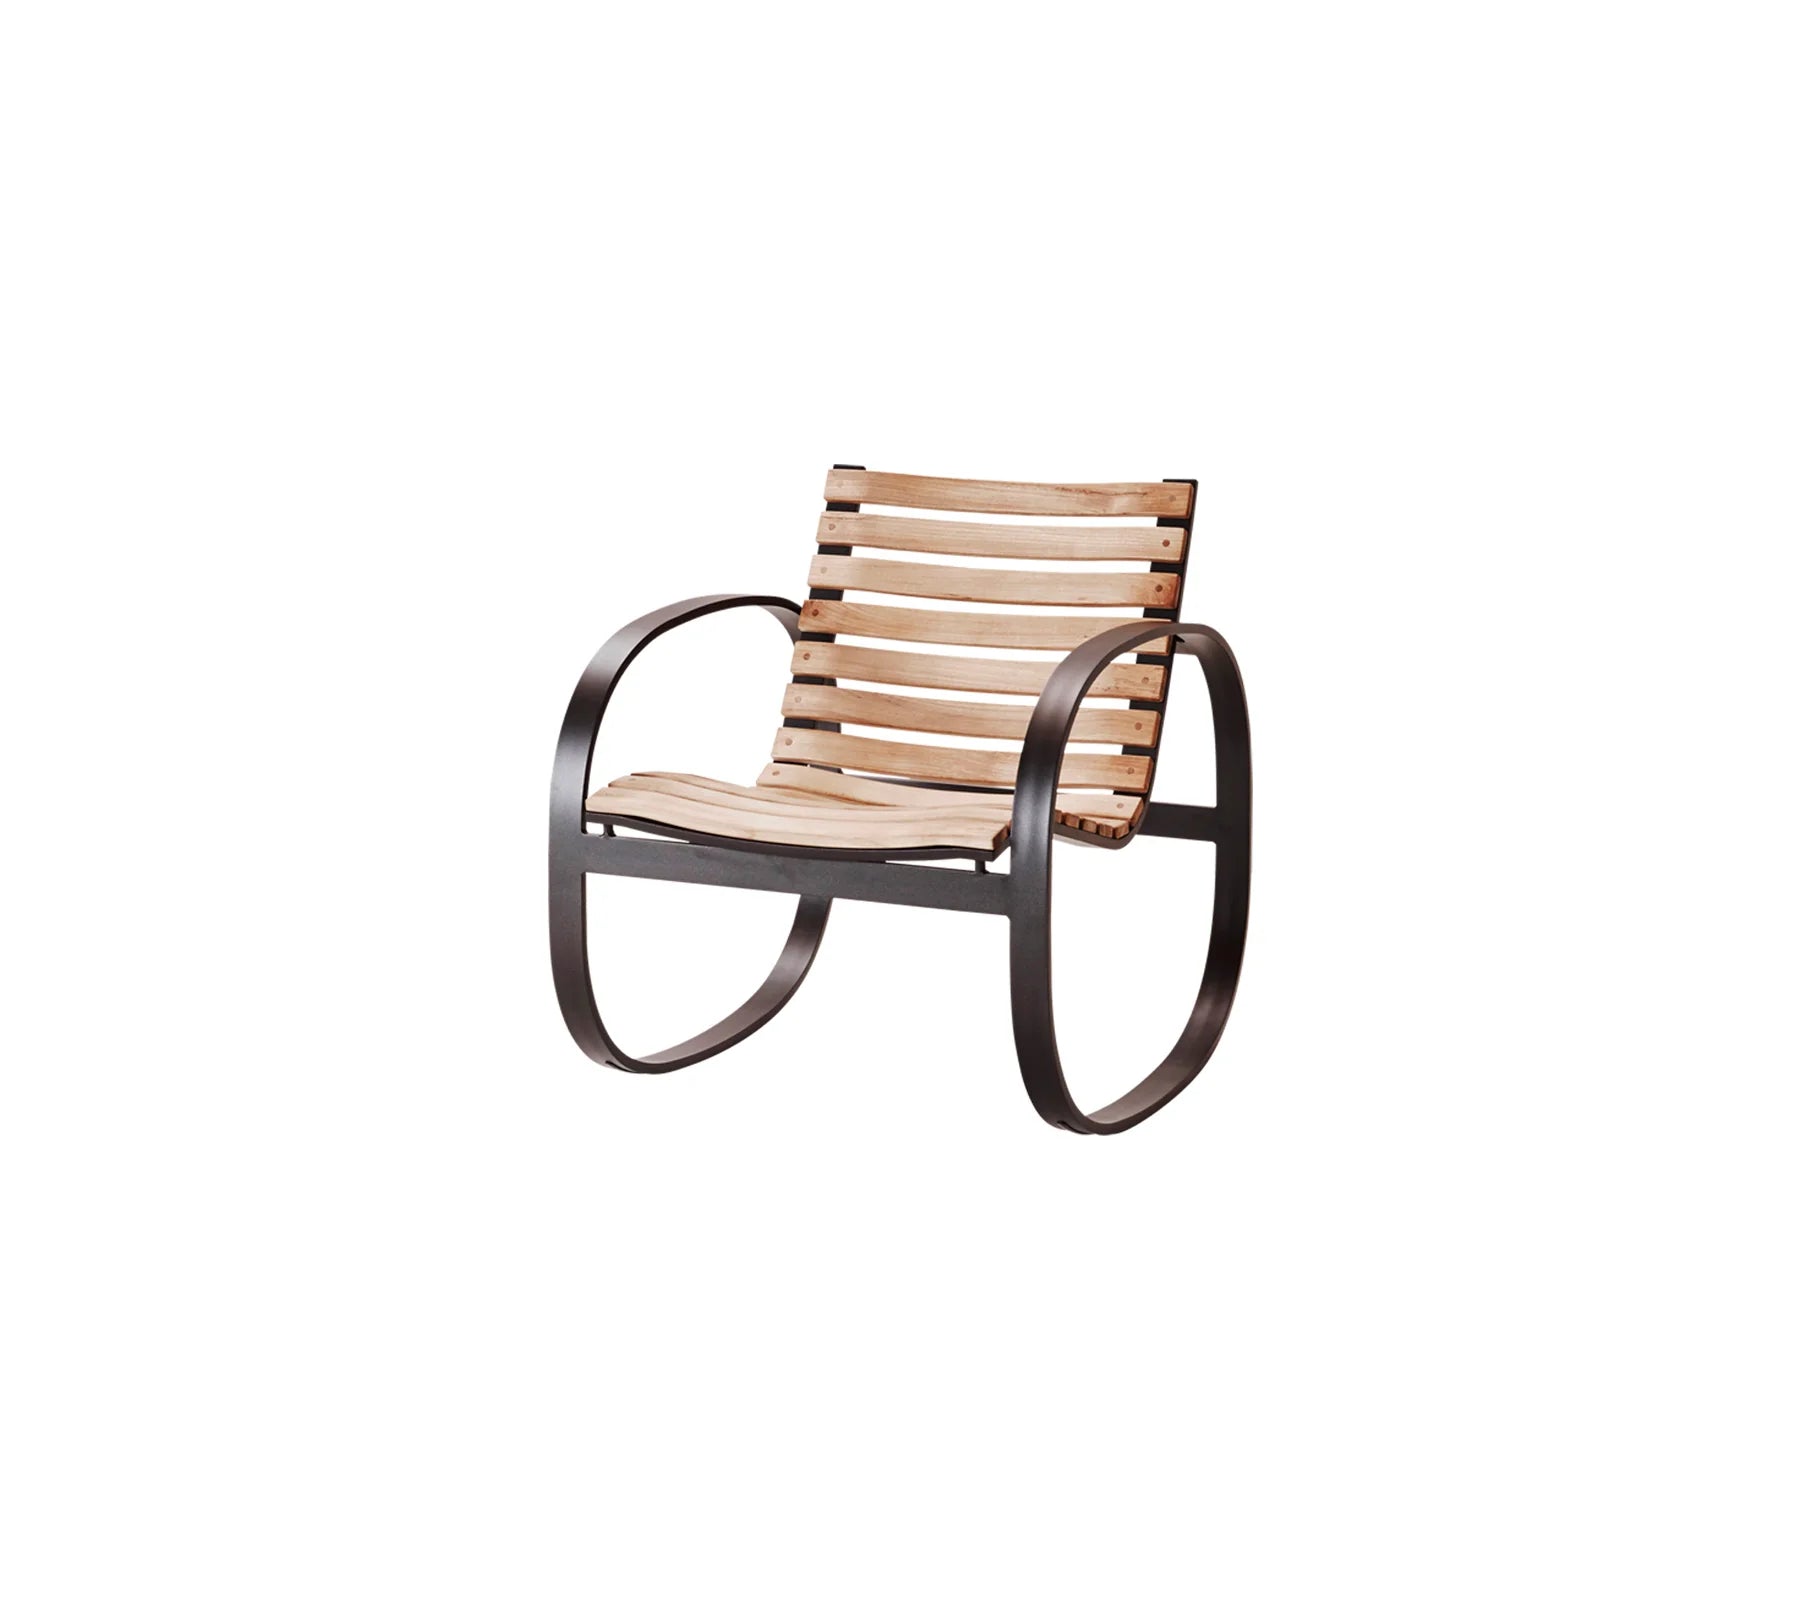 Boxhill's Parc teak outdoor rocking chair on white background